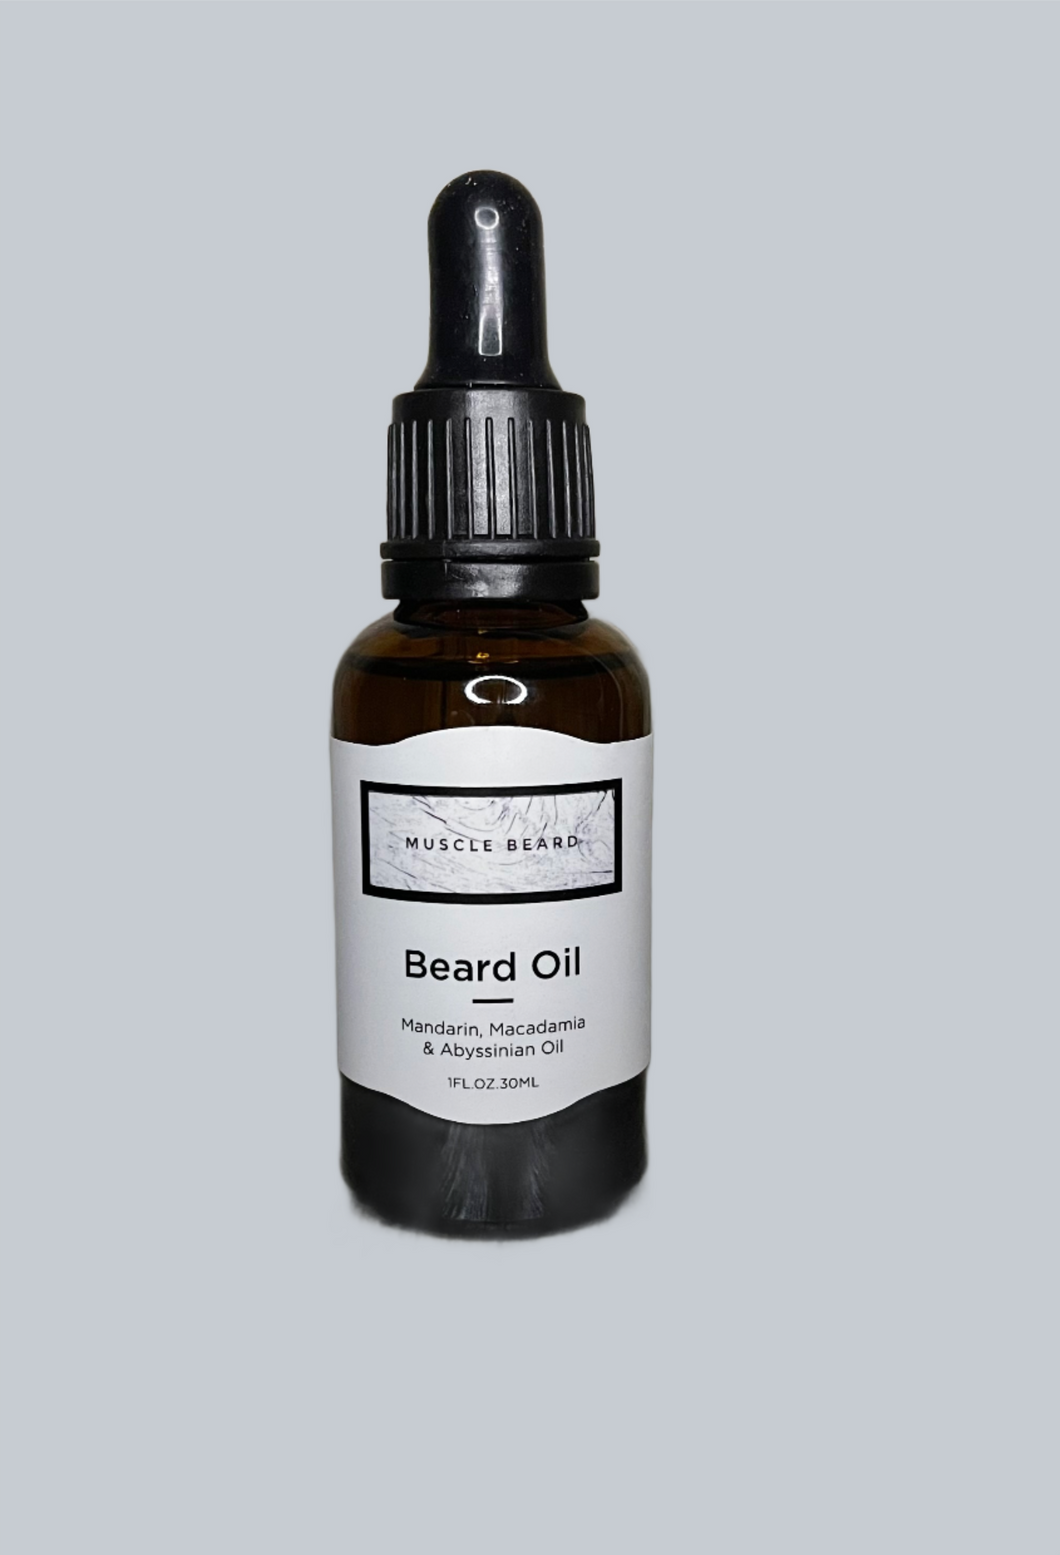 MuscleBeard Beard oil made in Australia, brown glass bottle with black lid, with oil dripper